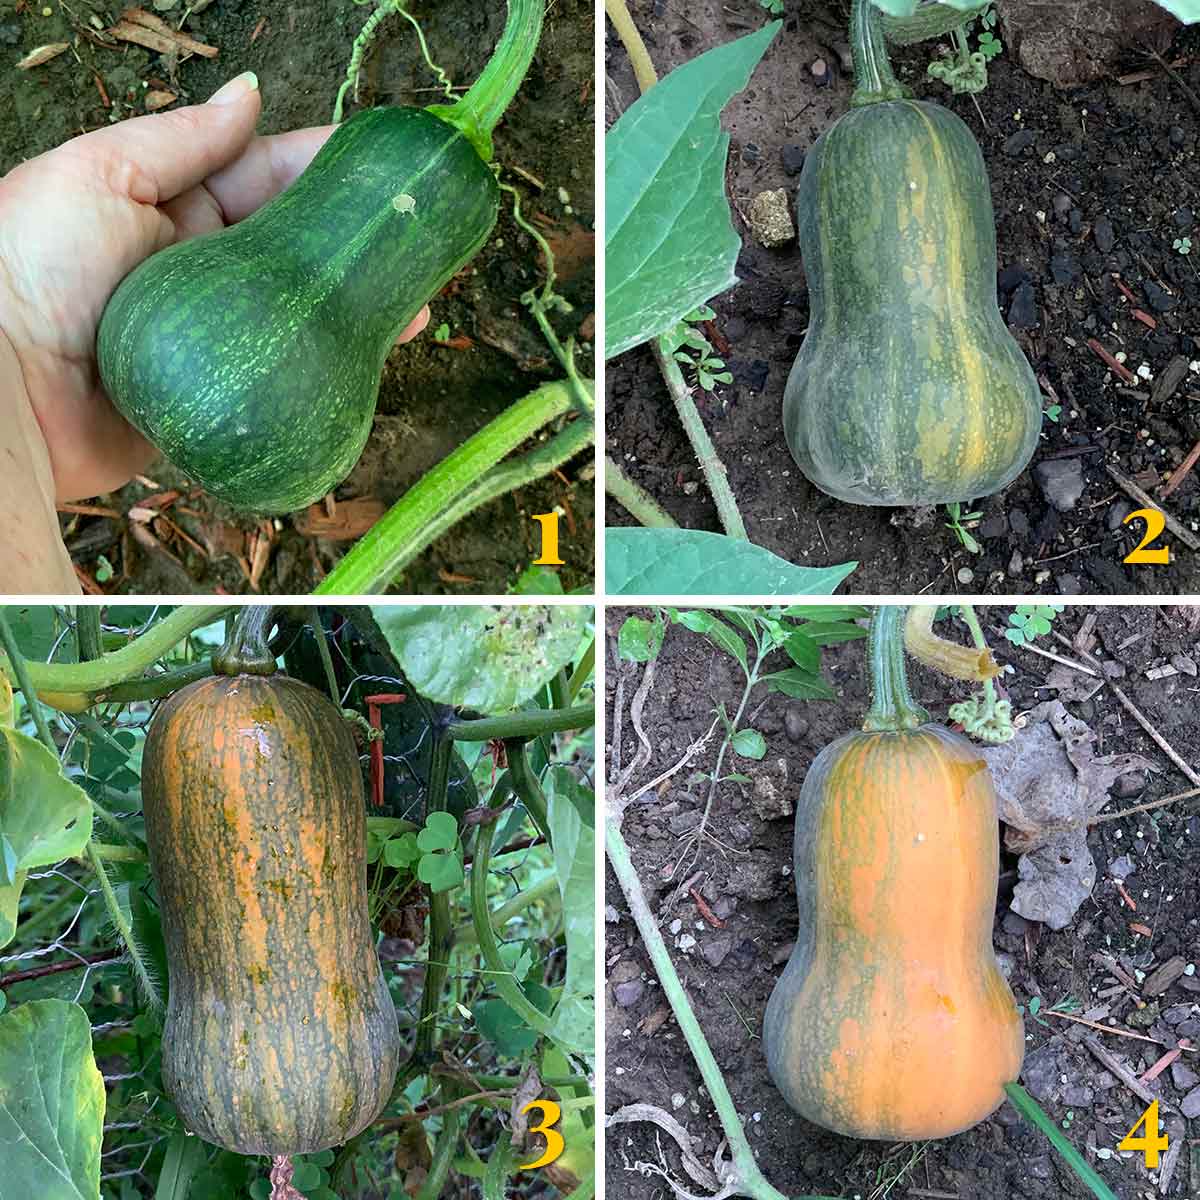 Collage showing the stages of honeynut squash ripening.